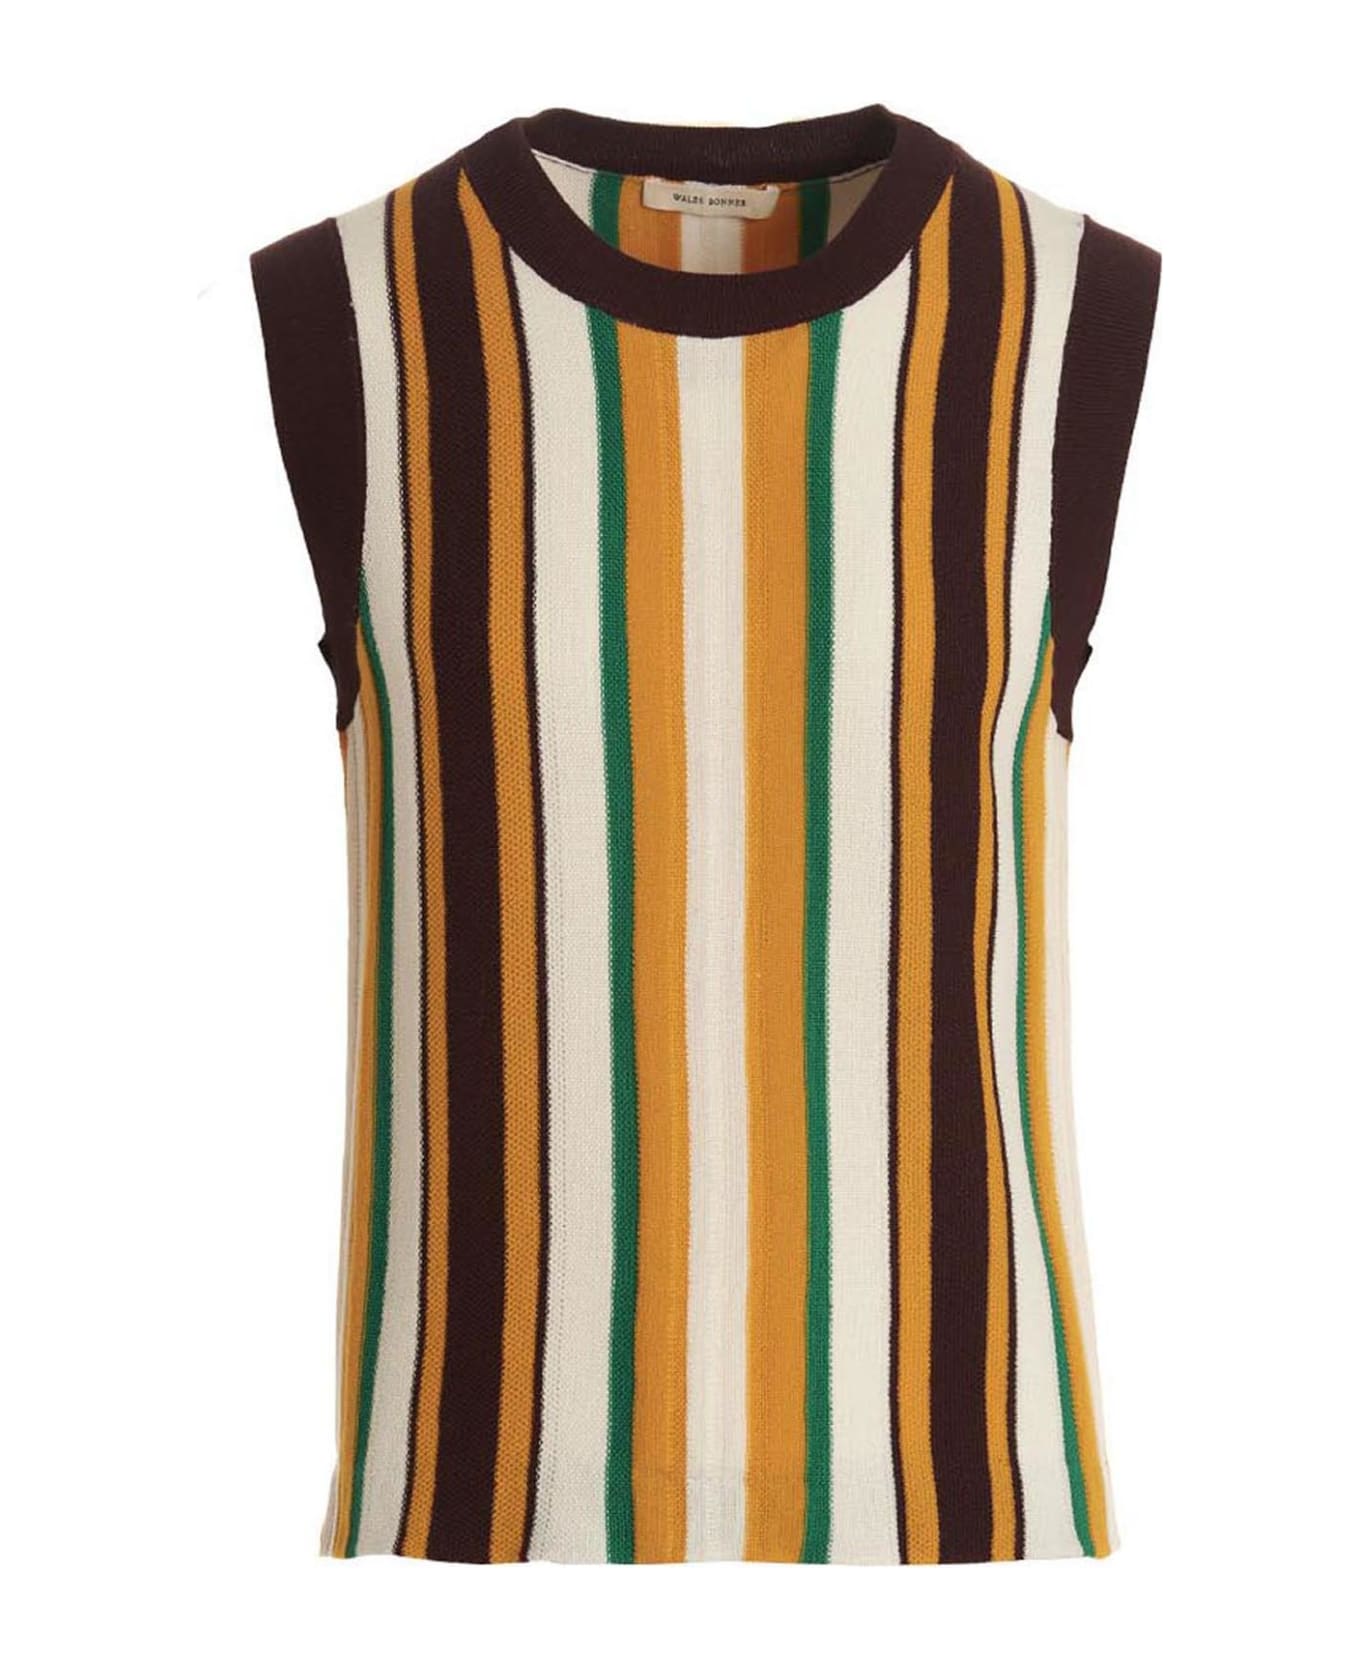 Wales Bonner Scale Tank Top - Multicolor タンクトップ